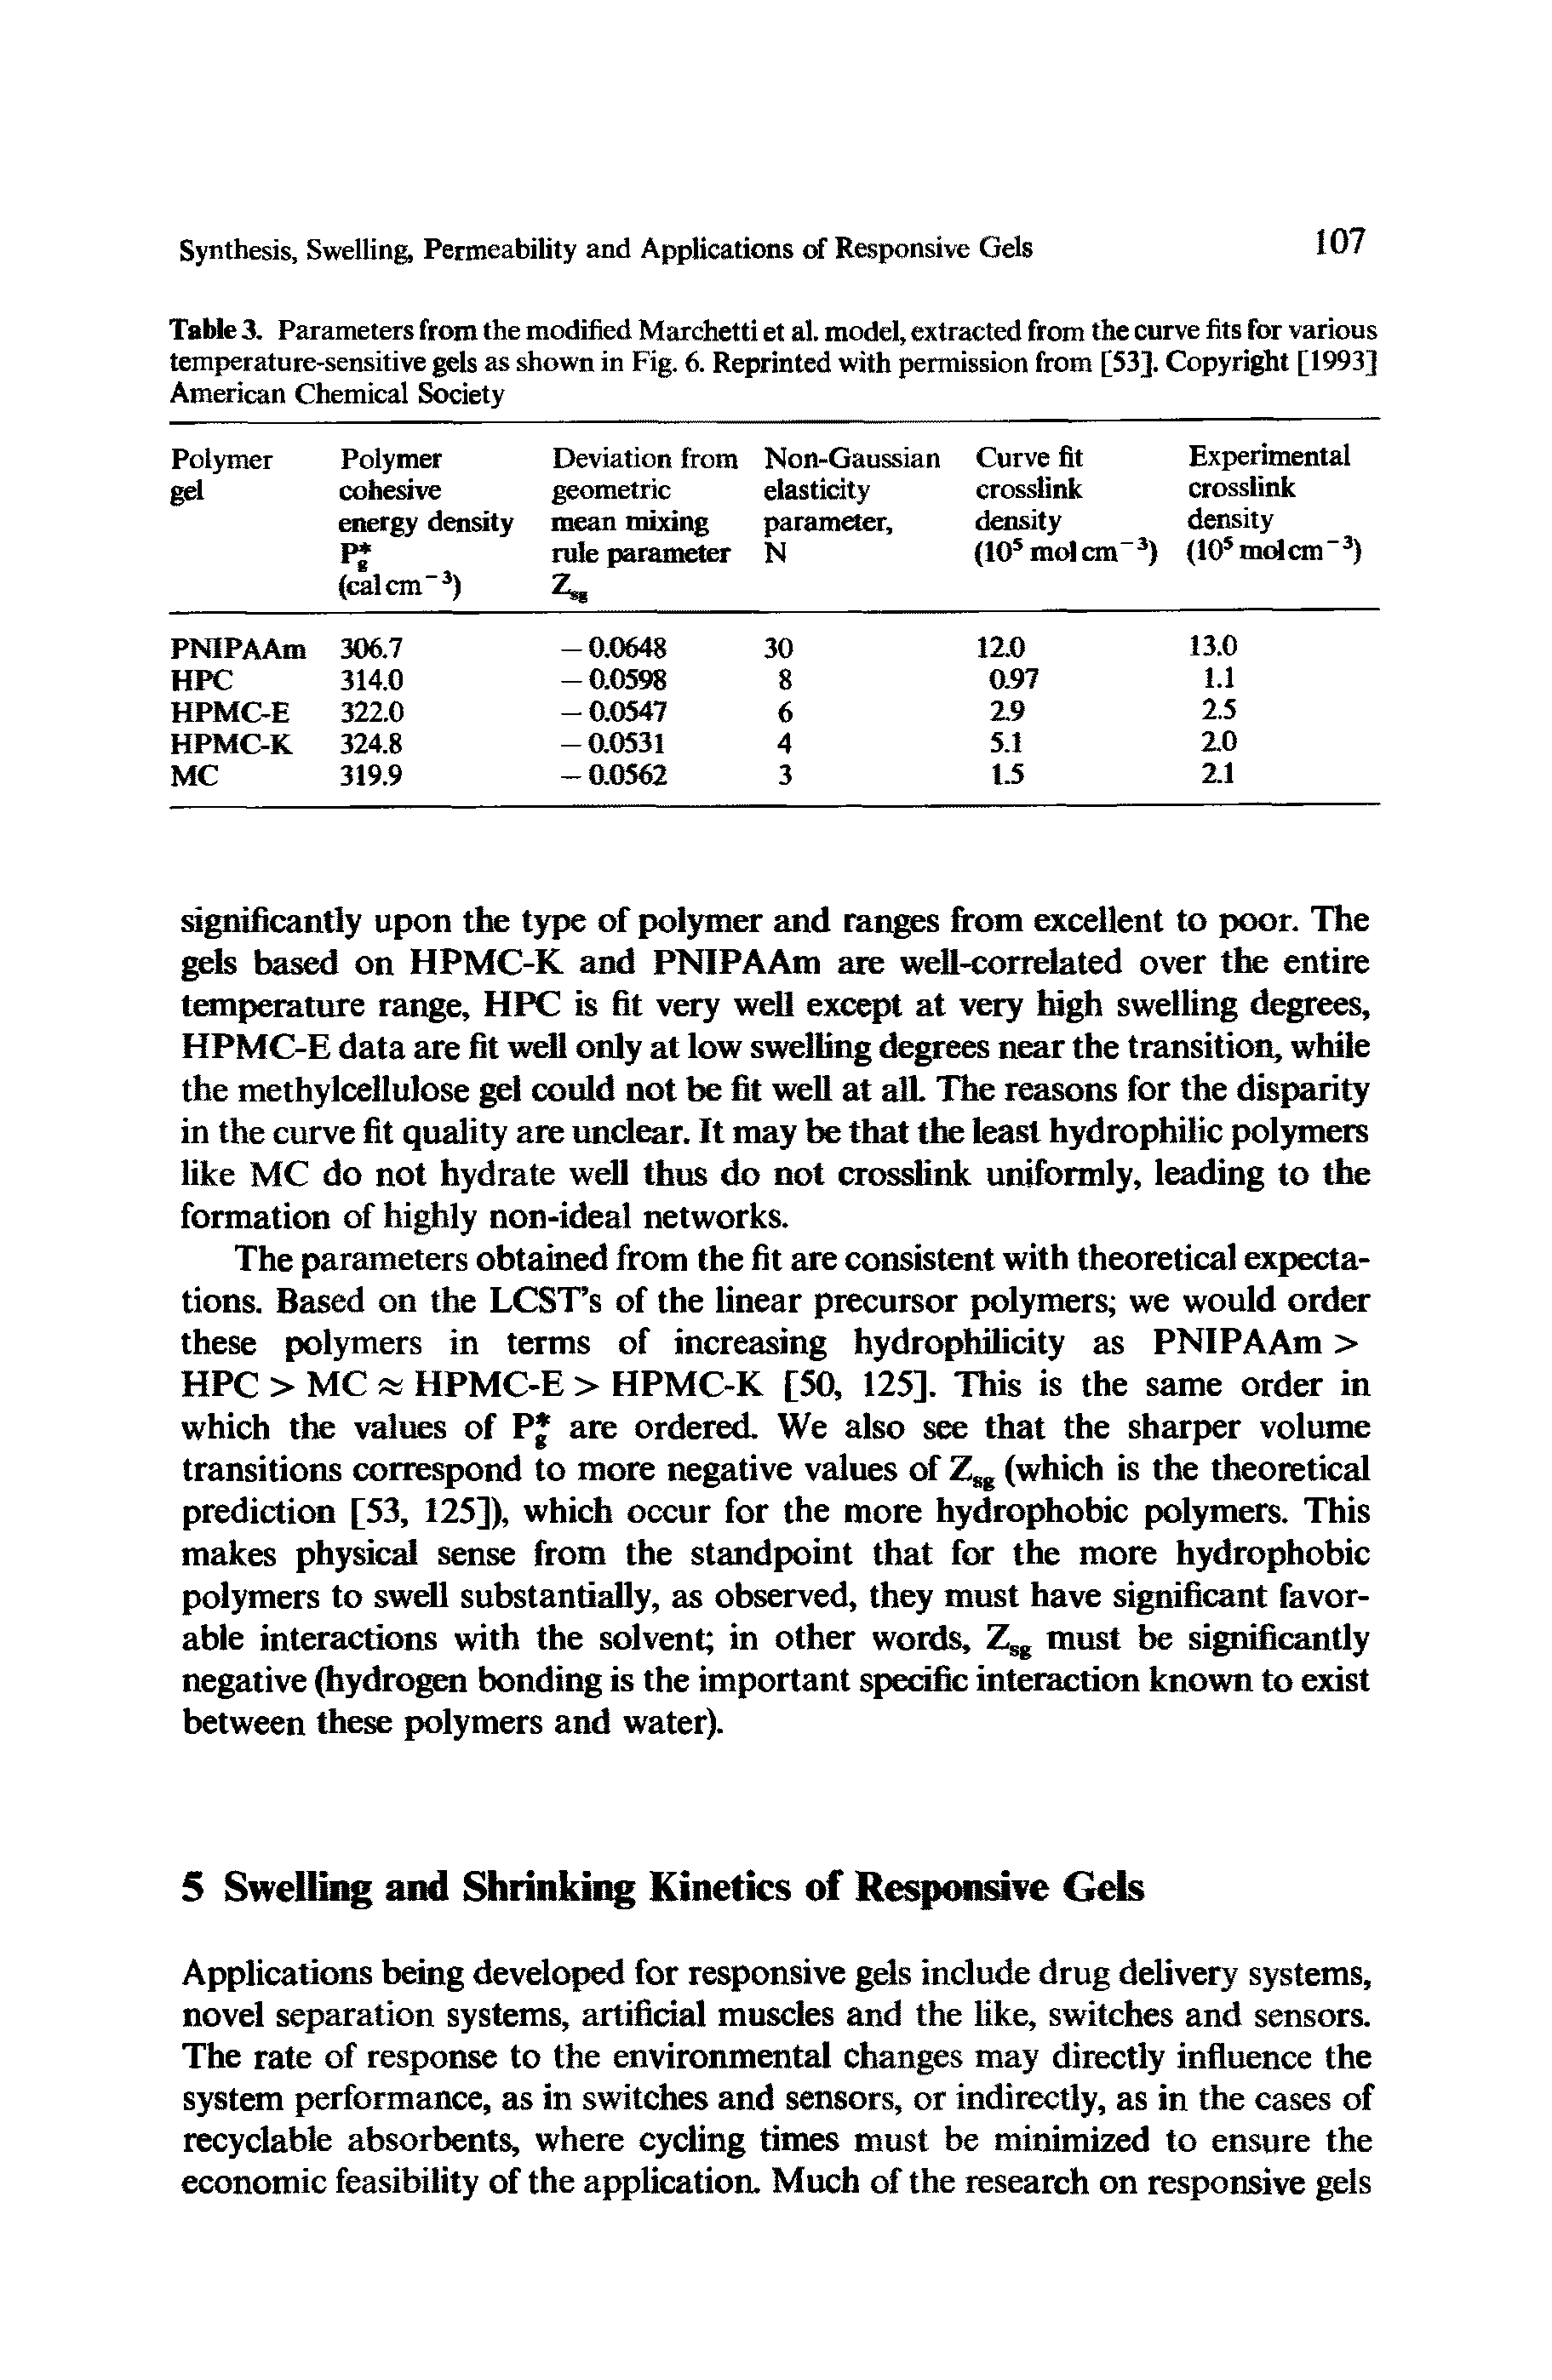 Table 3. Parameters from the modified Marchetti et al. model, extracted from the curve fits for various temperature-sensitive gels as shown in Fig. 6. Reprinted with permission from [53]. Copyright [1993] American Chemical Society...